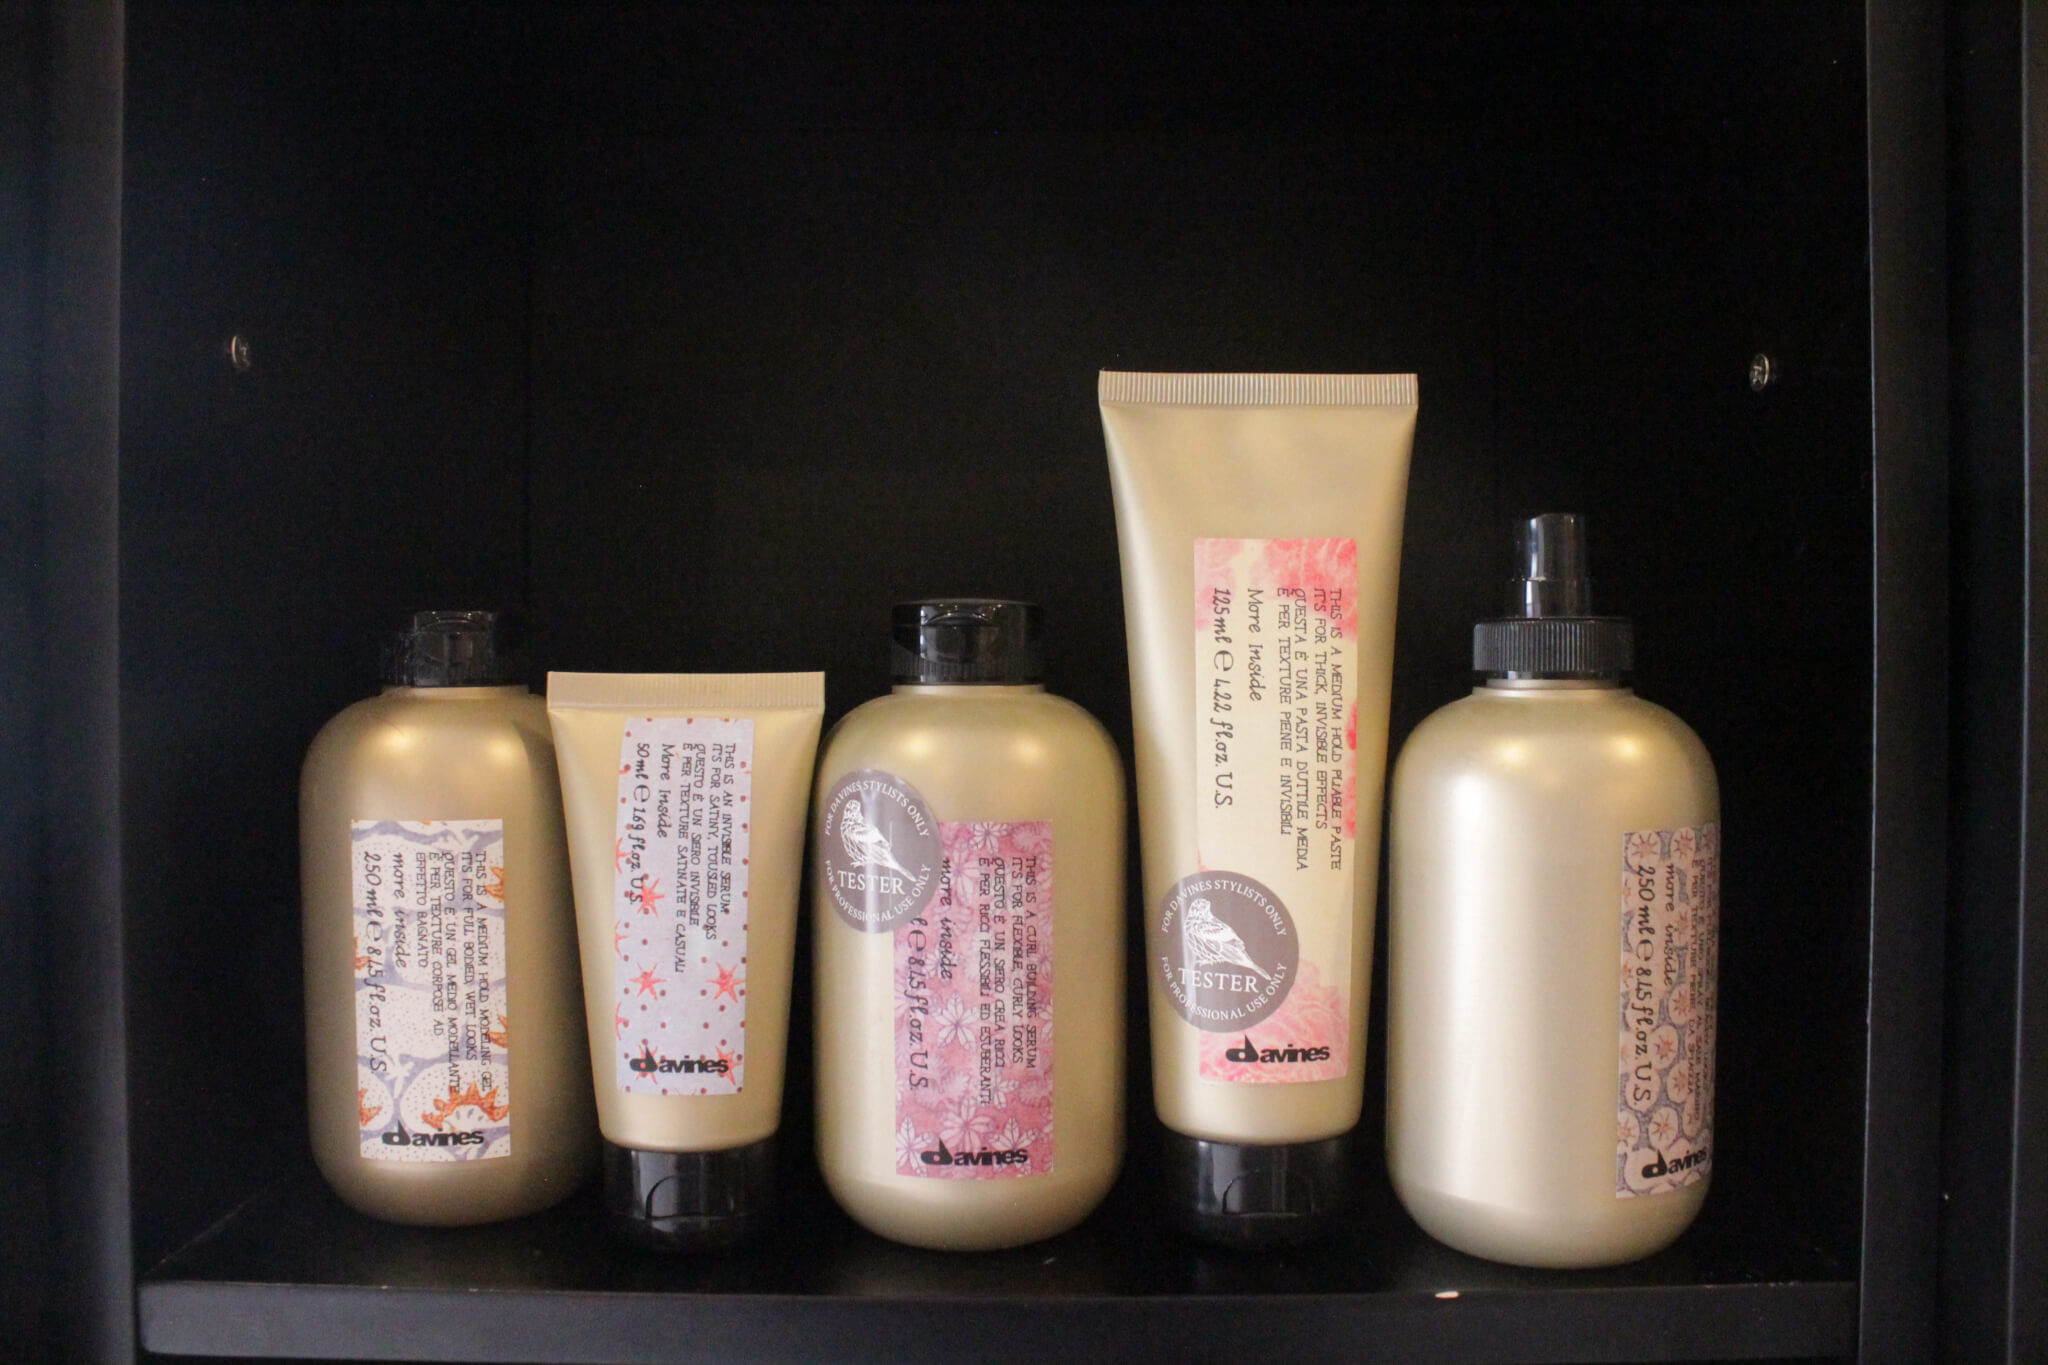 Davines hair care products for salons